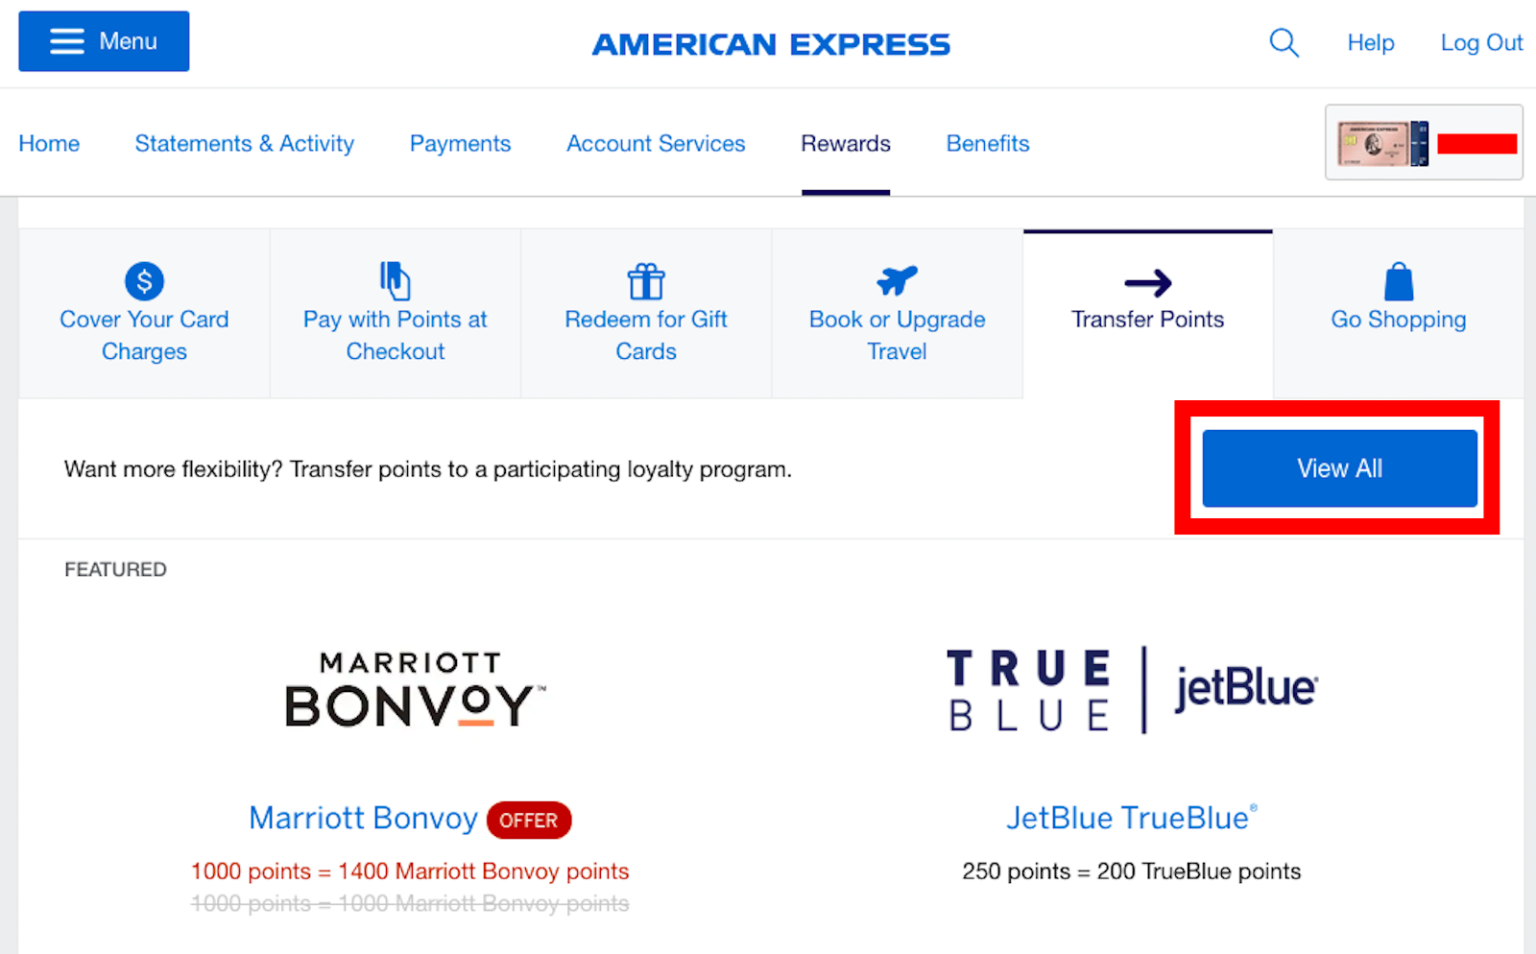 How To Transfer American Express Points: A "How To" Guide